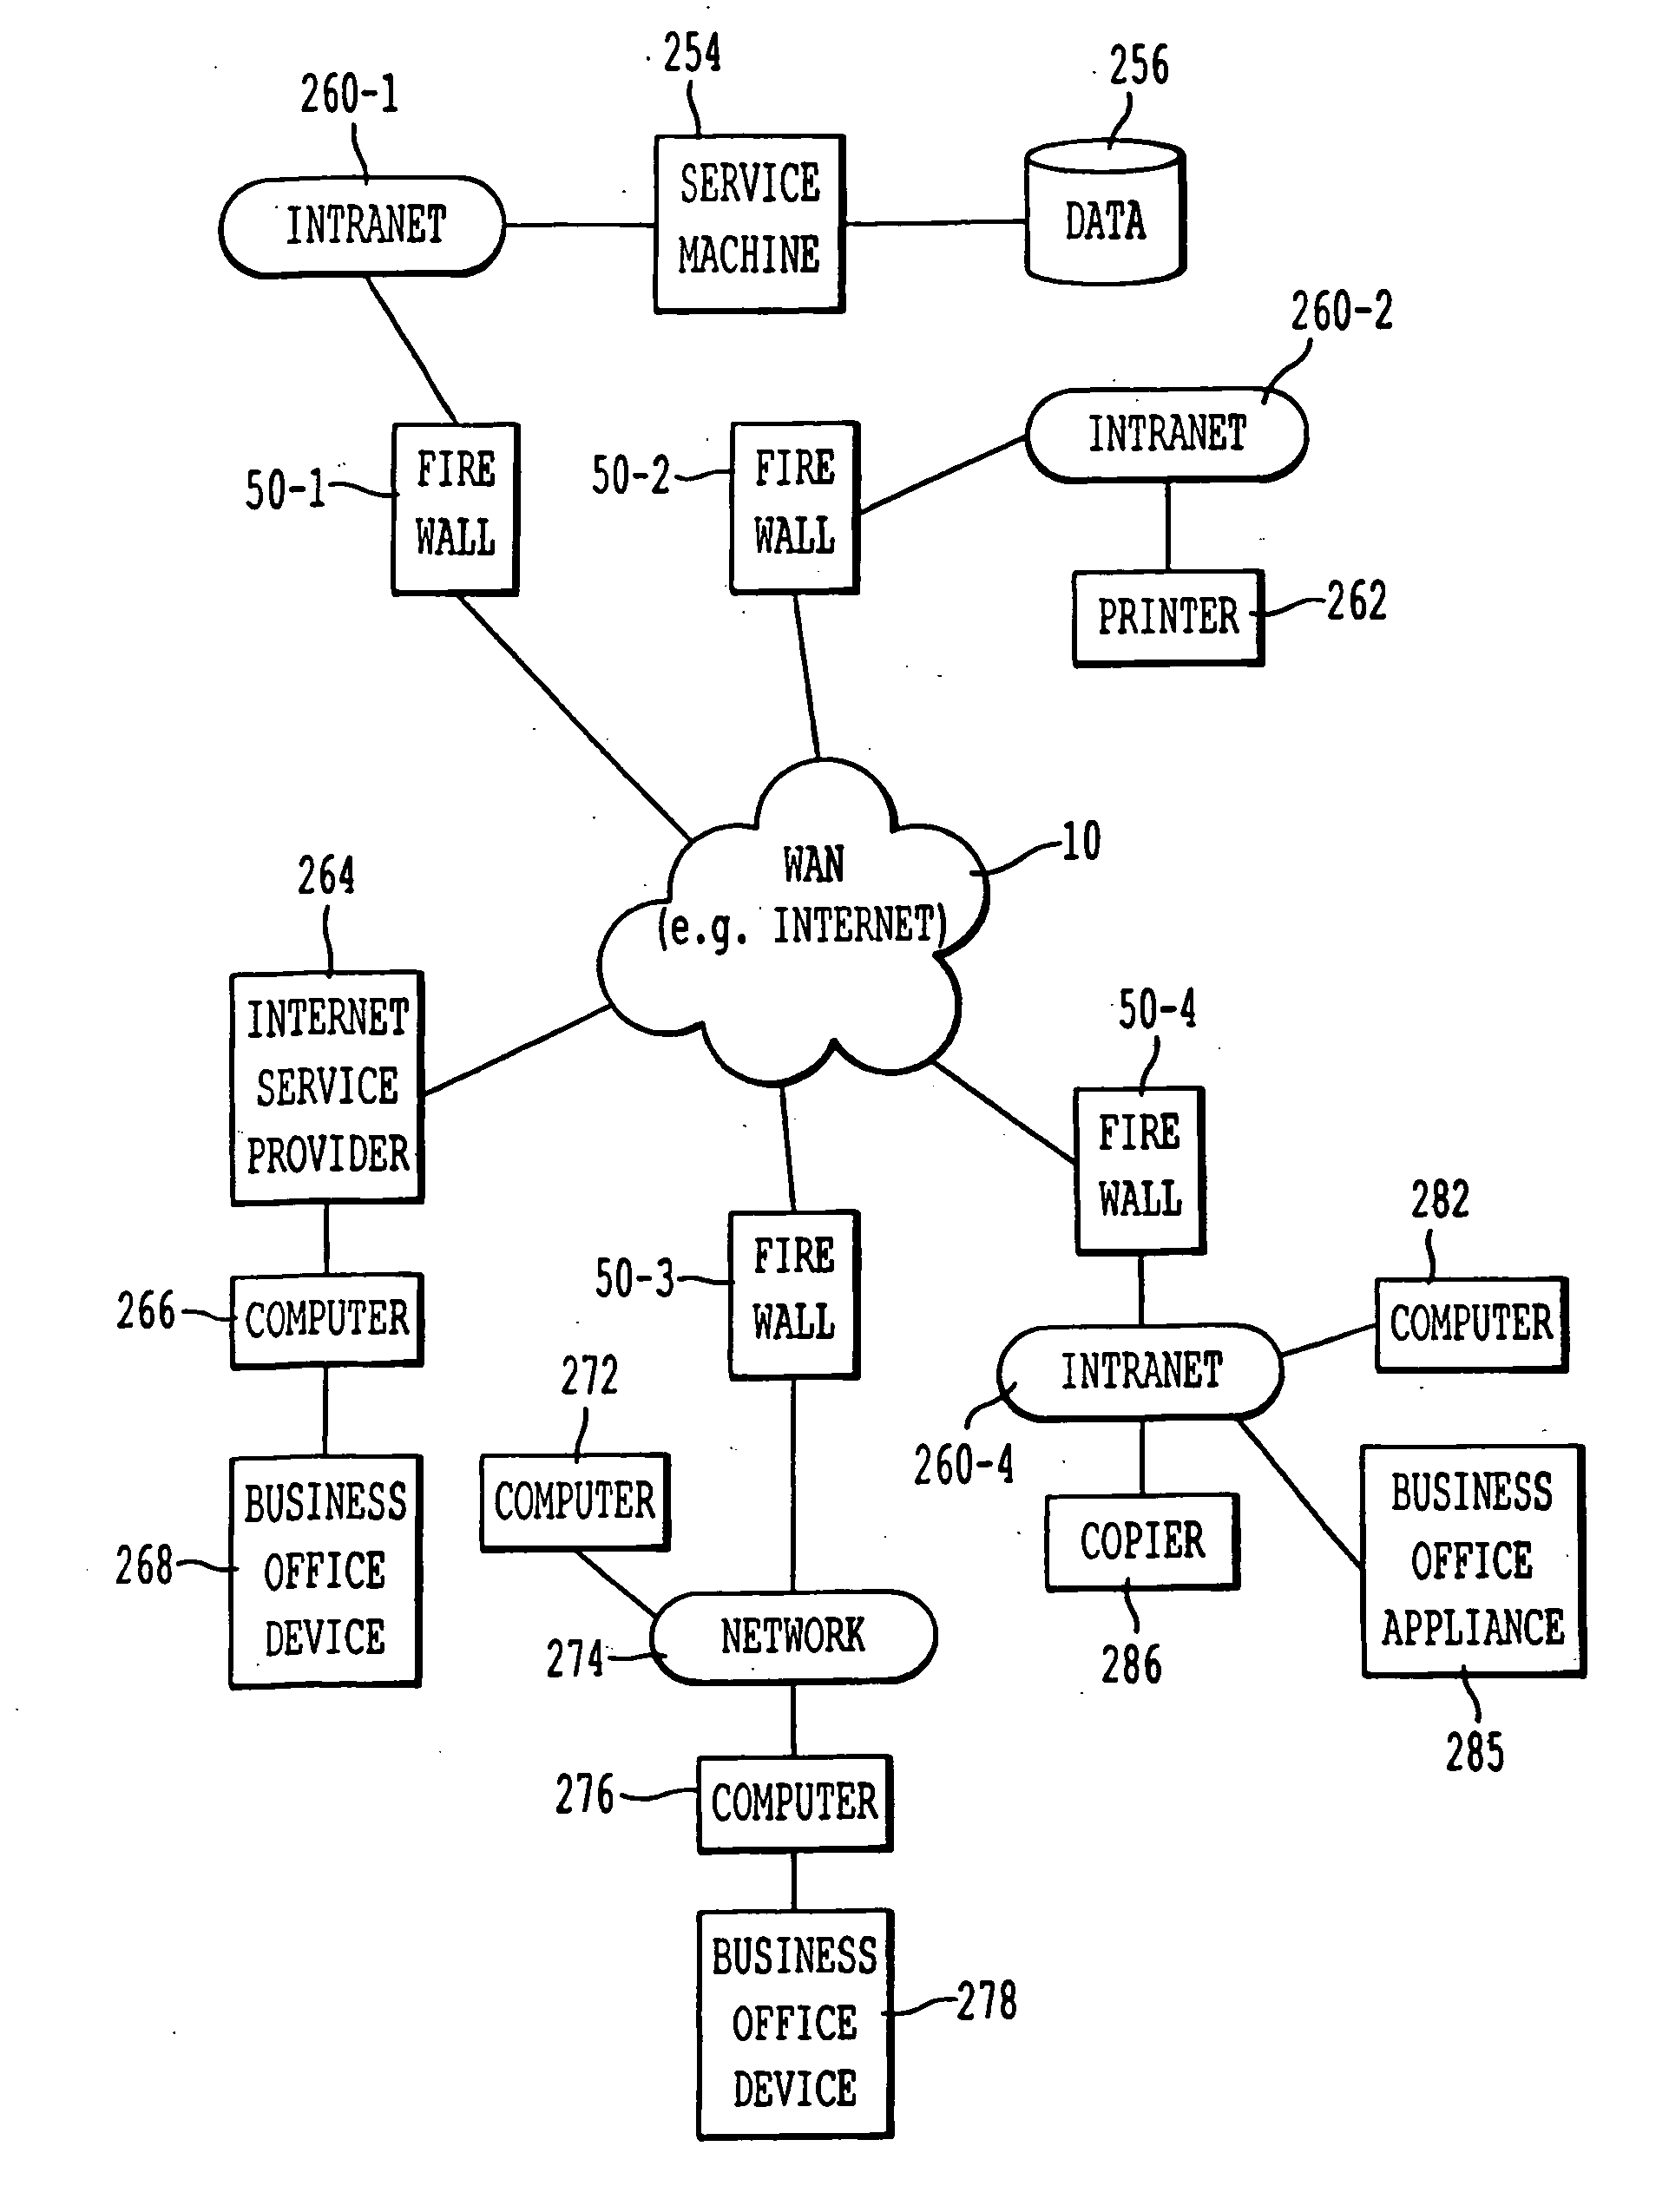 Method and system for extracting information from networked devices using the HTTP protocol and precondition information